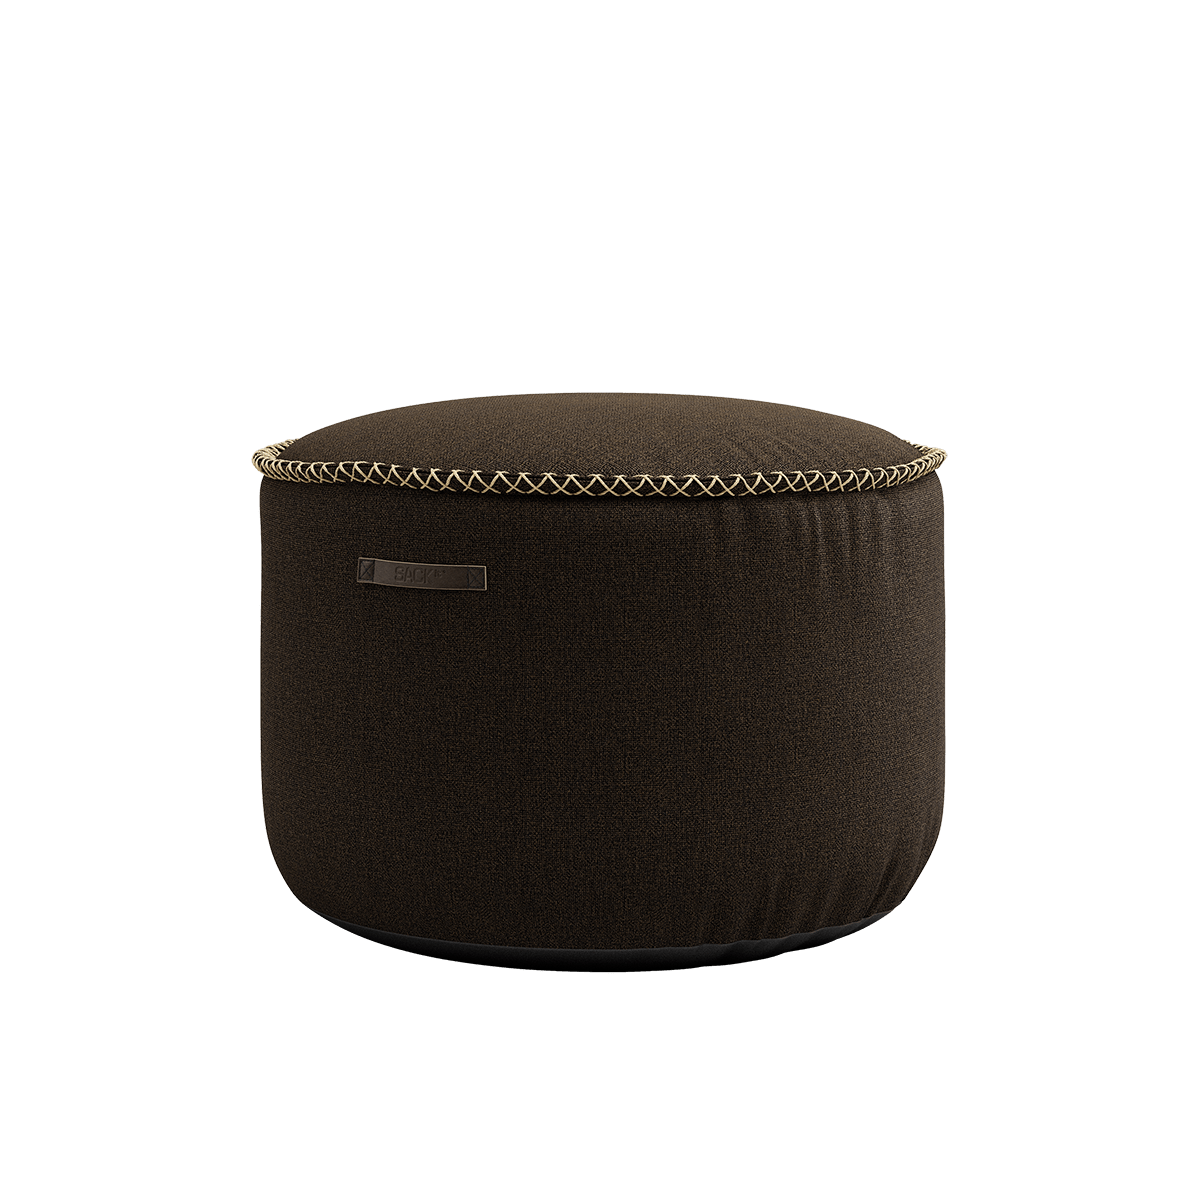 variant_8567014% | Medley Pouf [Contract] - Medley Coffee | SACKit